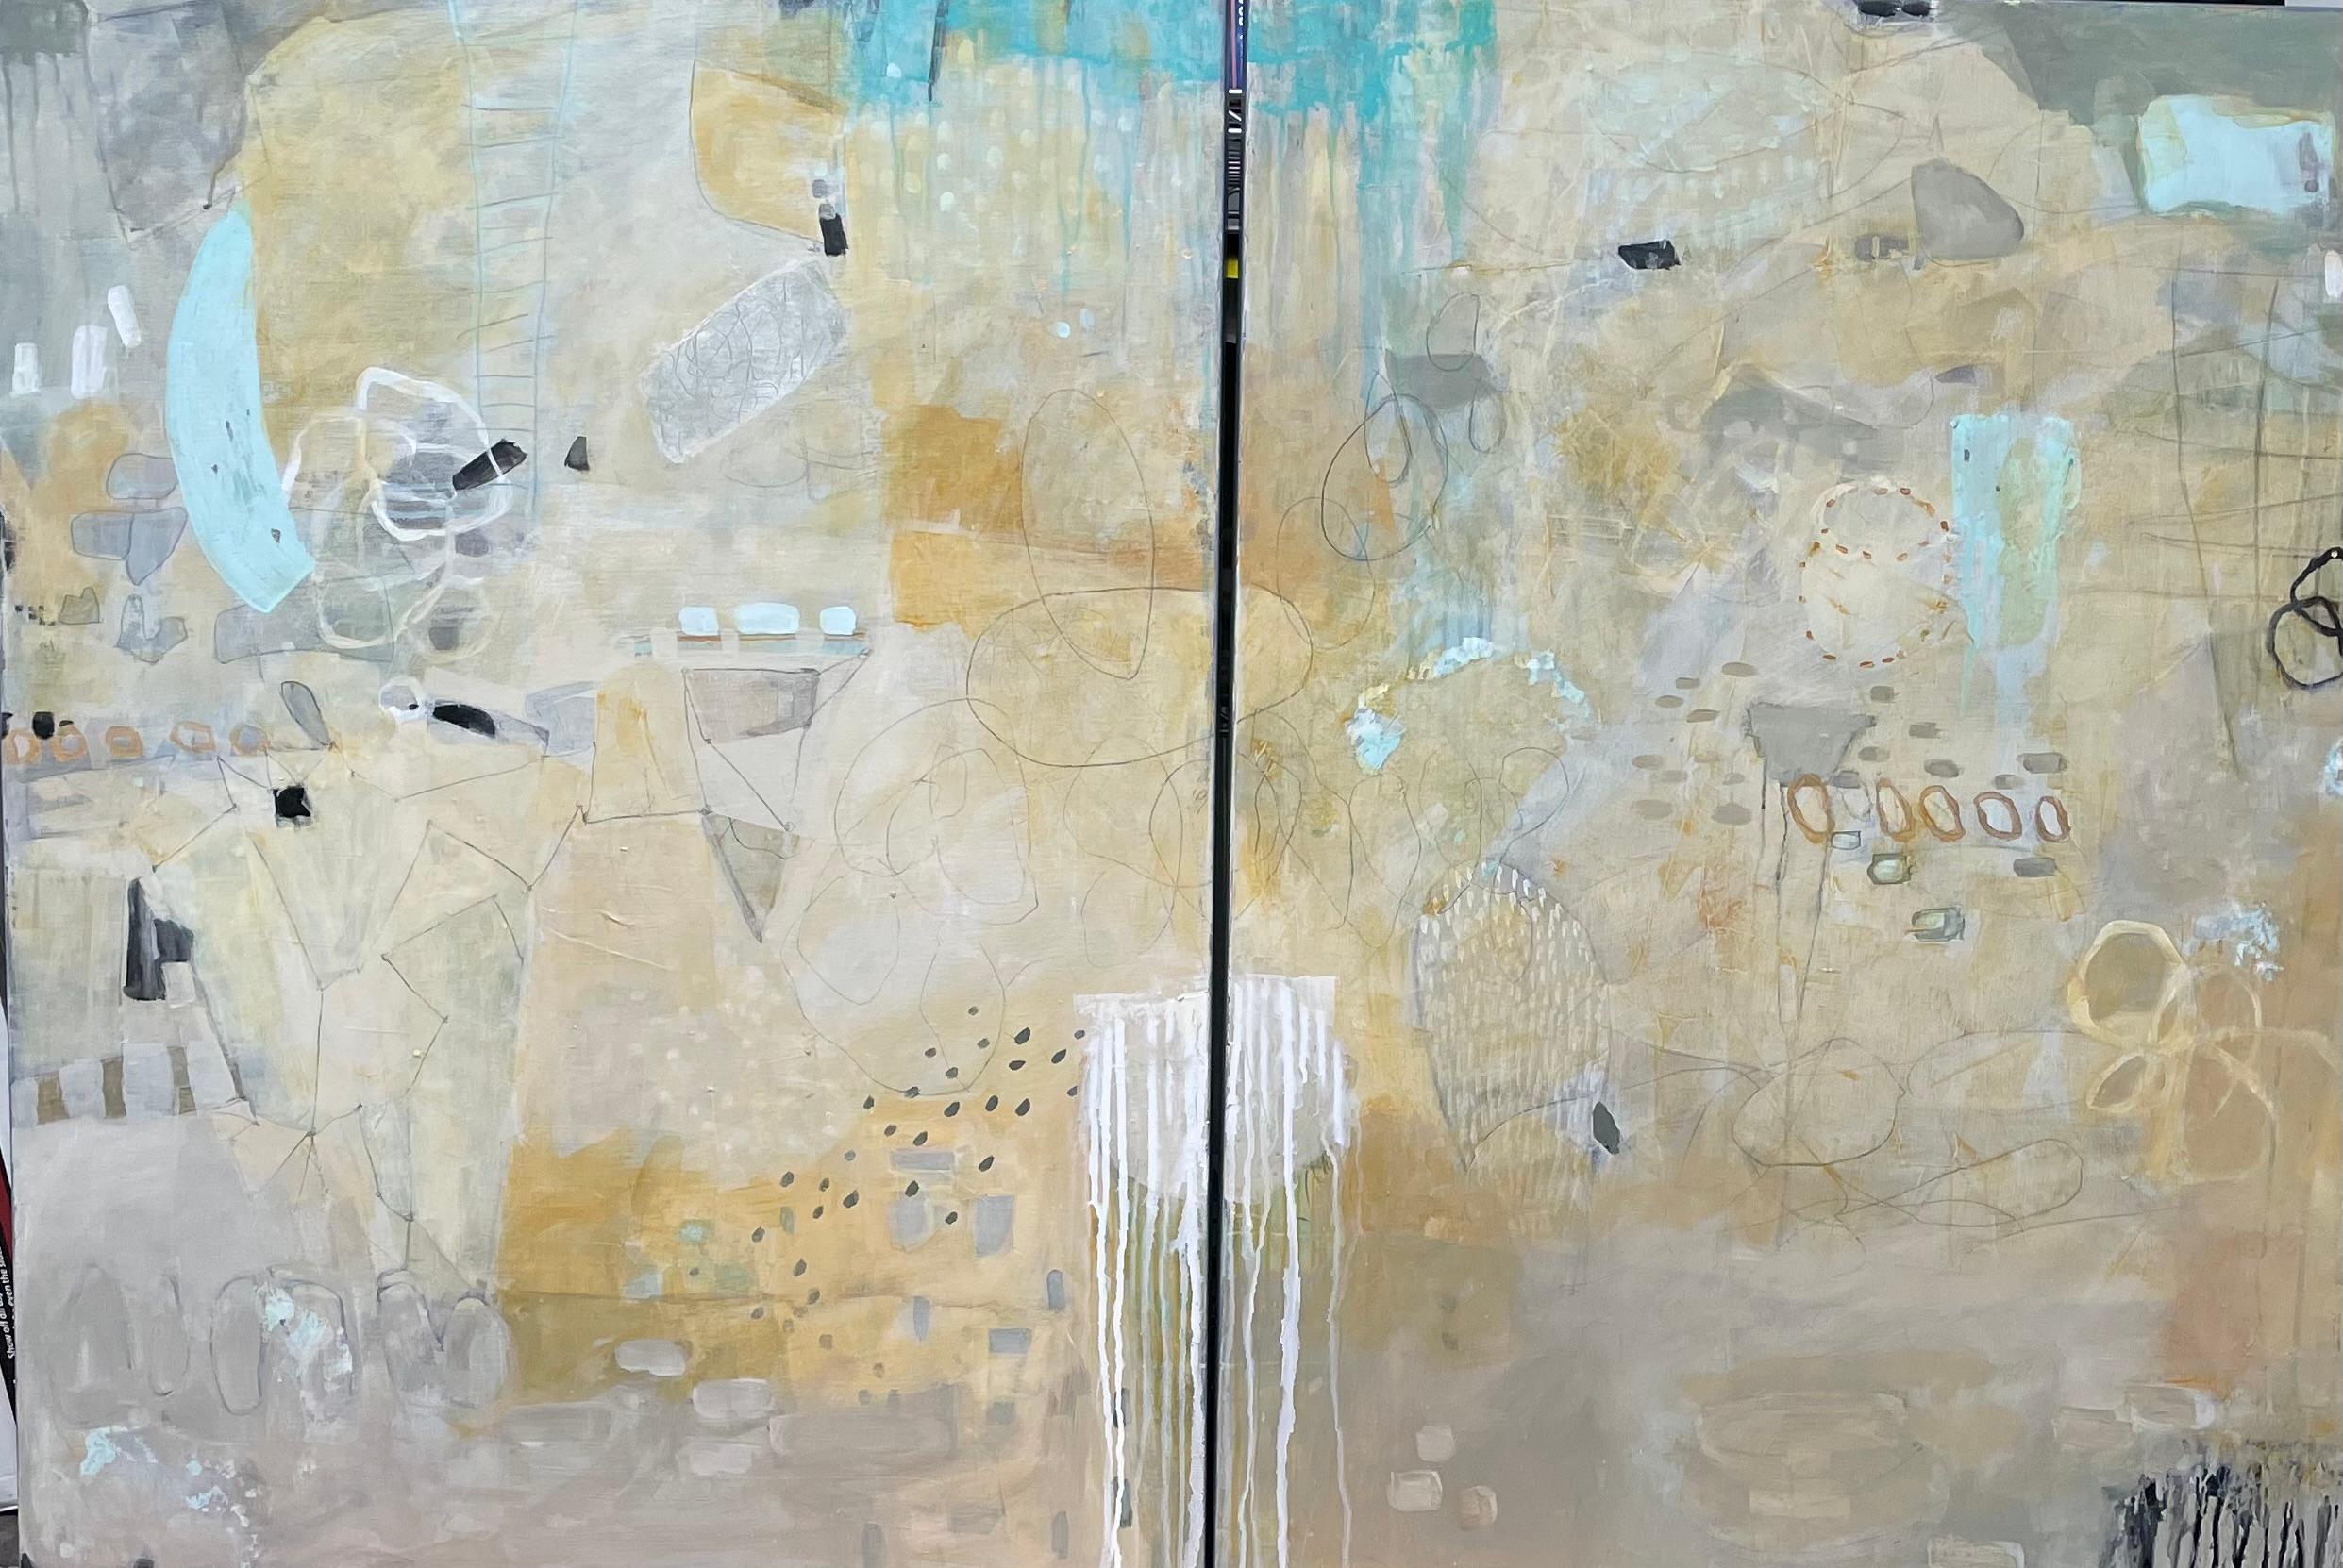 Earth Poem is an contemporary abstract landscape painting by Texan artist Eleanor McCarthy.  It can also be described as a abstract floral painting. Eleanor McCarthy uses acrylic paints on canvas to create the soothing colors in her new contemporary